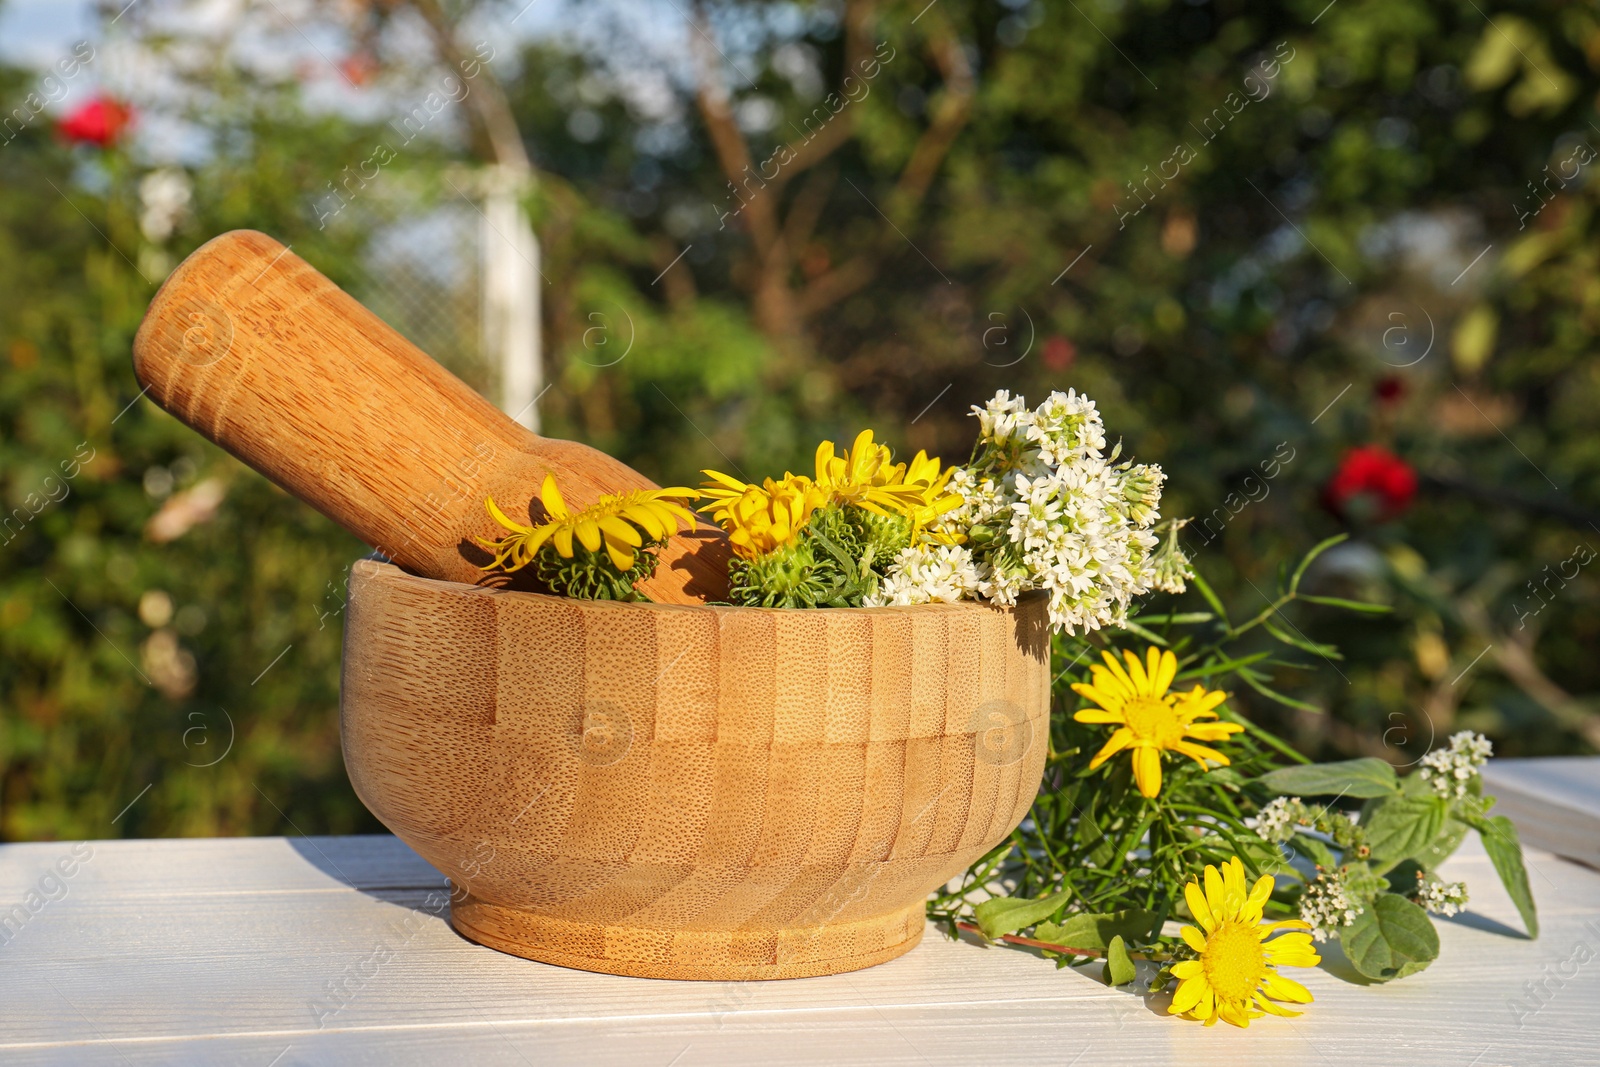 Photo of Mortar with pestle, flowers and herbs on white wooden table outdoors